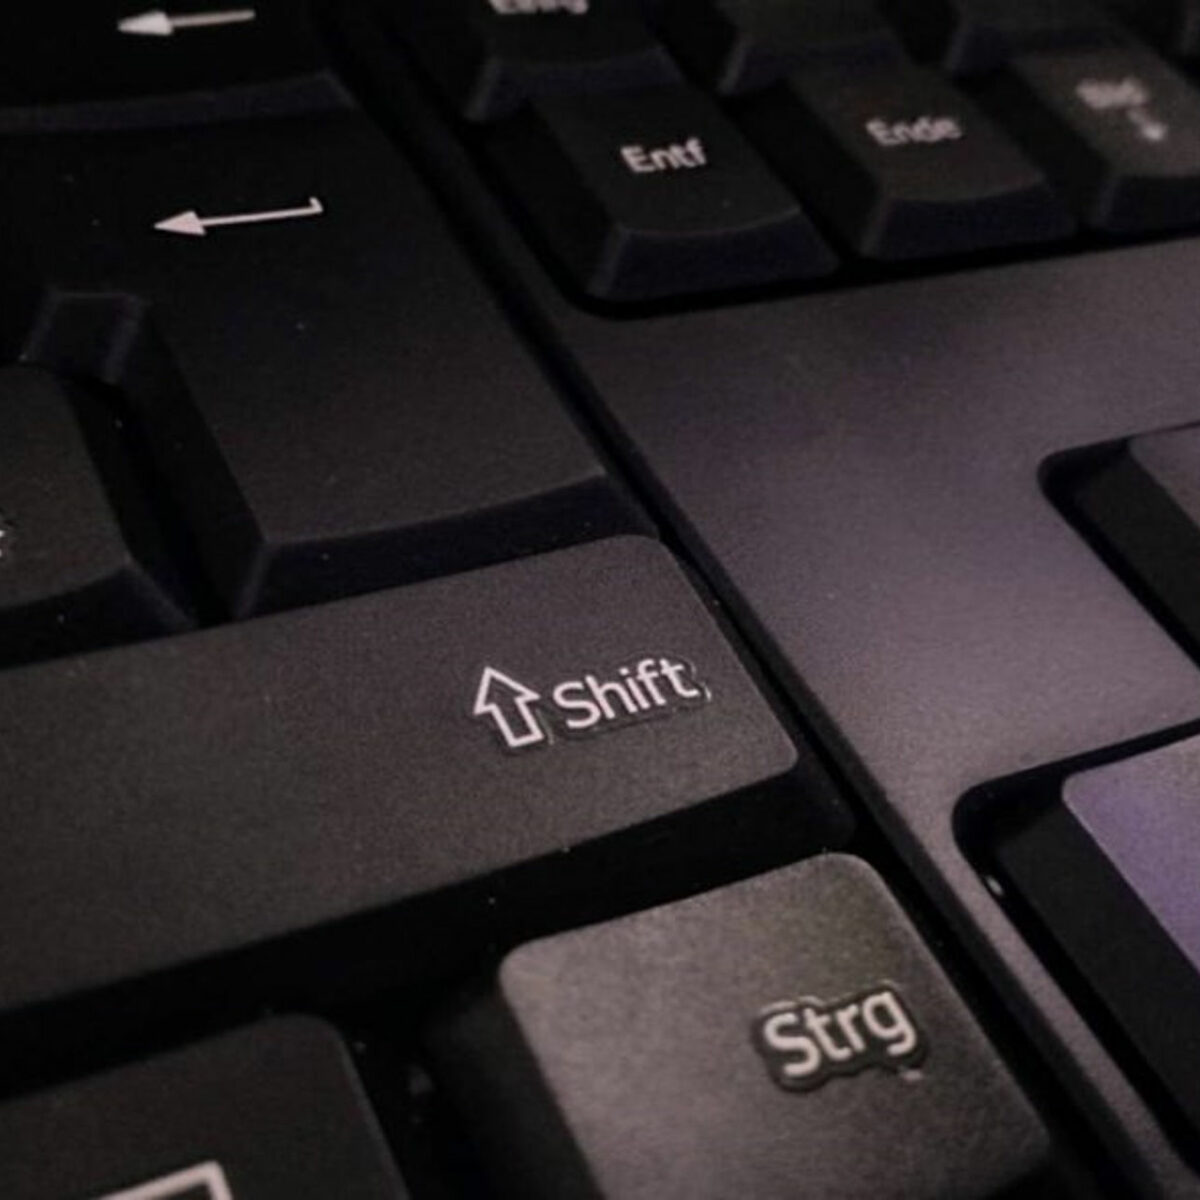 How To Fix Shift Key Not Working On Computer Right Side